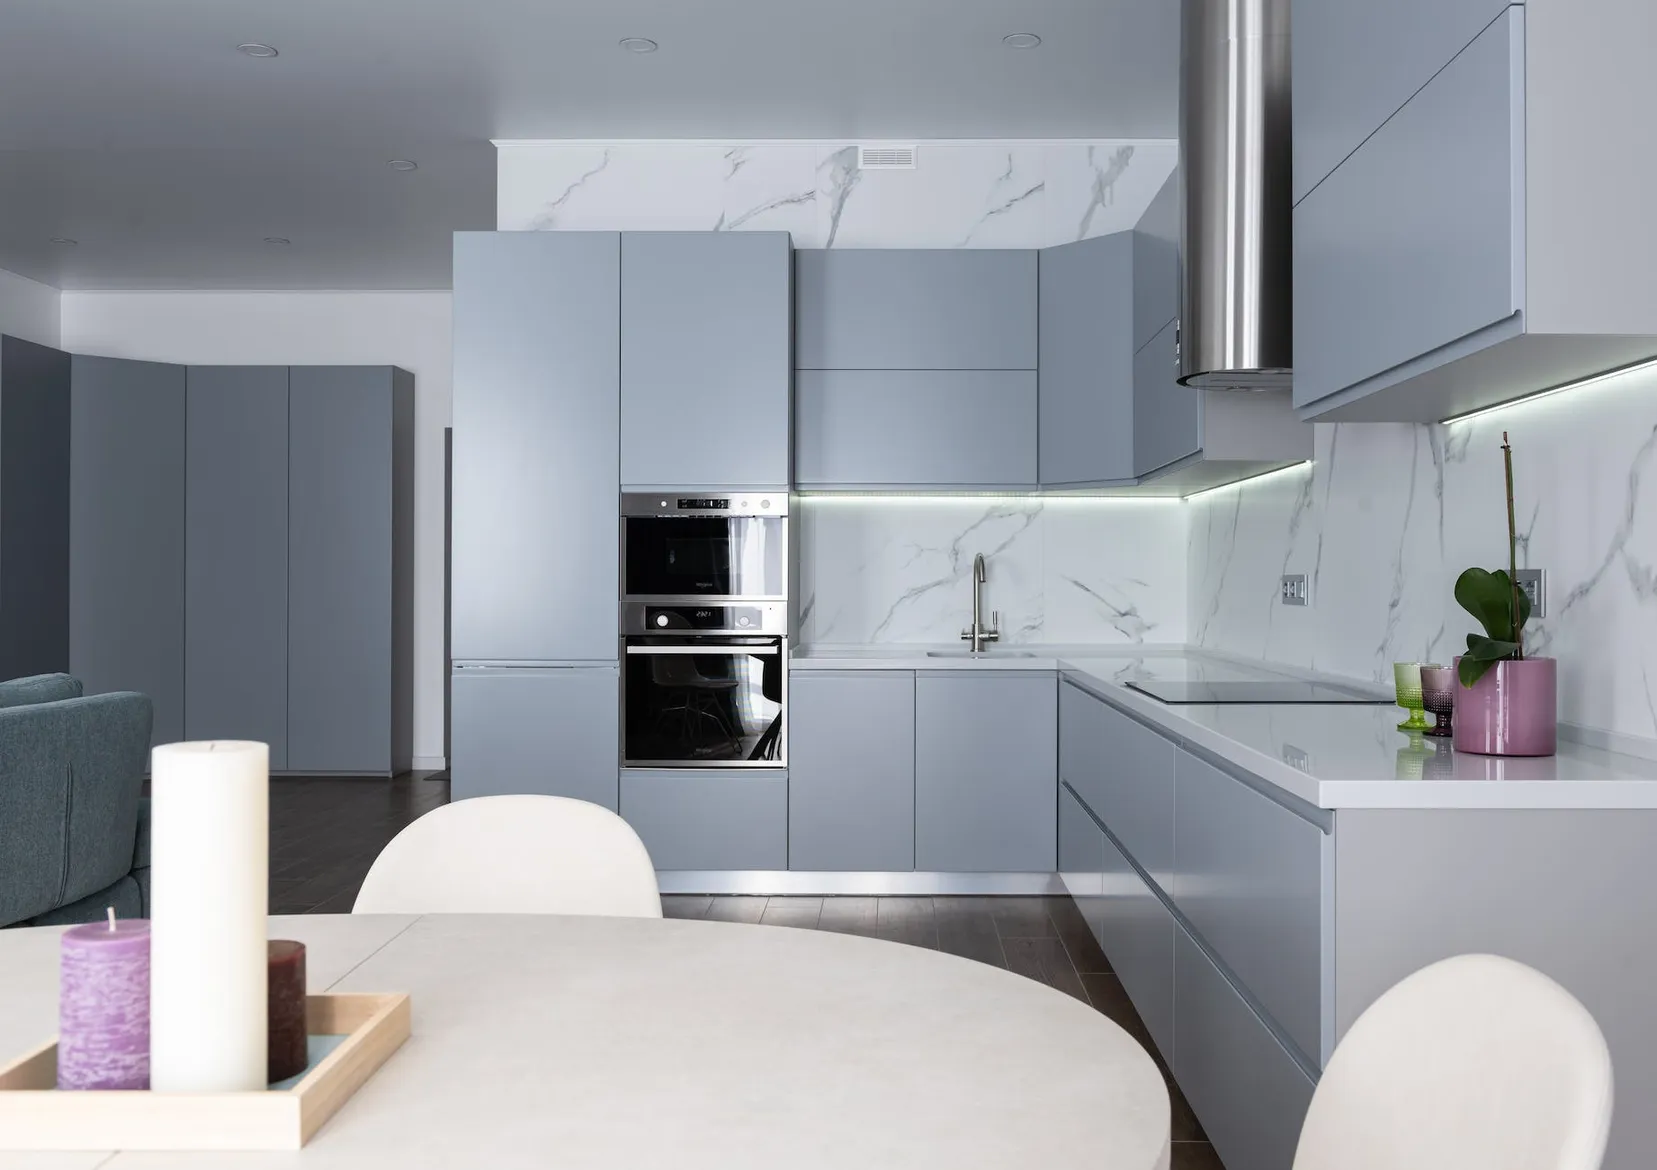 Understanding The Legal Requirements For Non-Kitchen Apartments